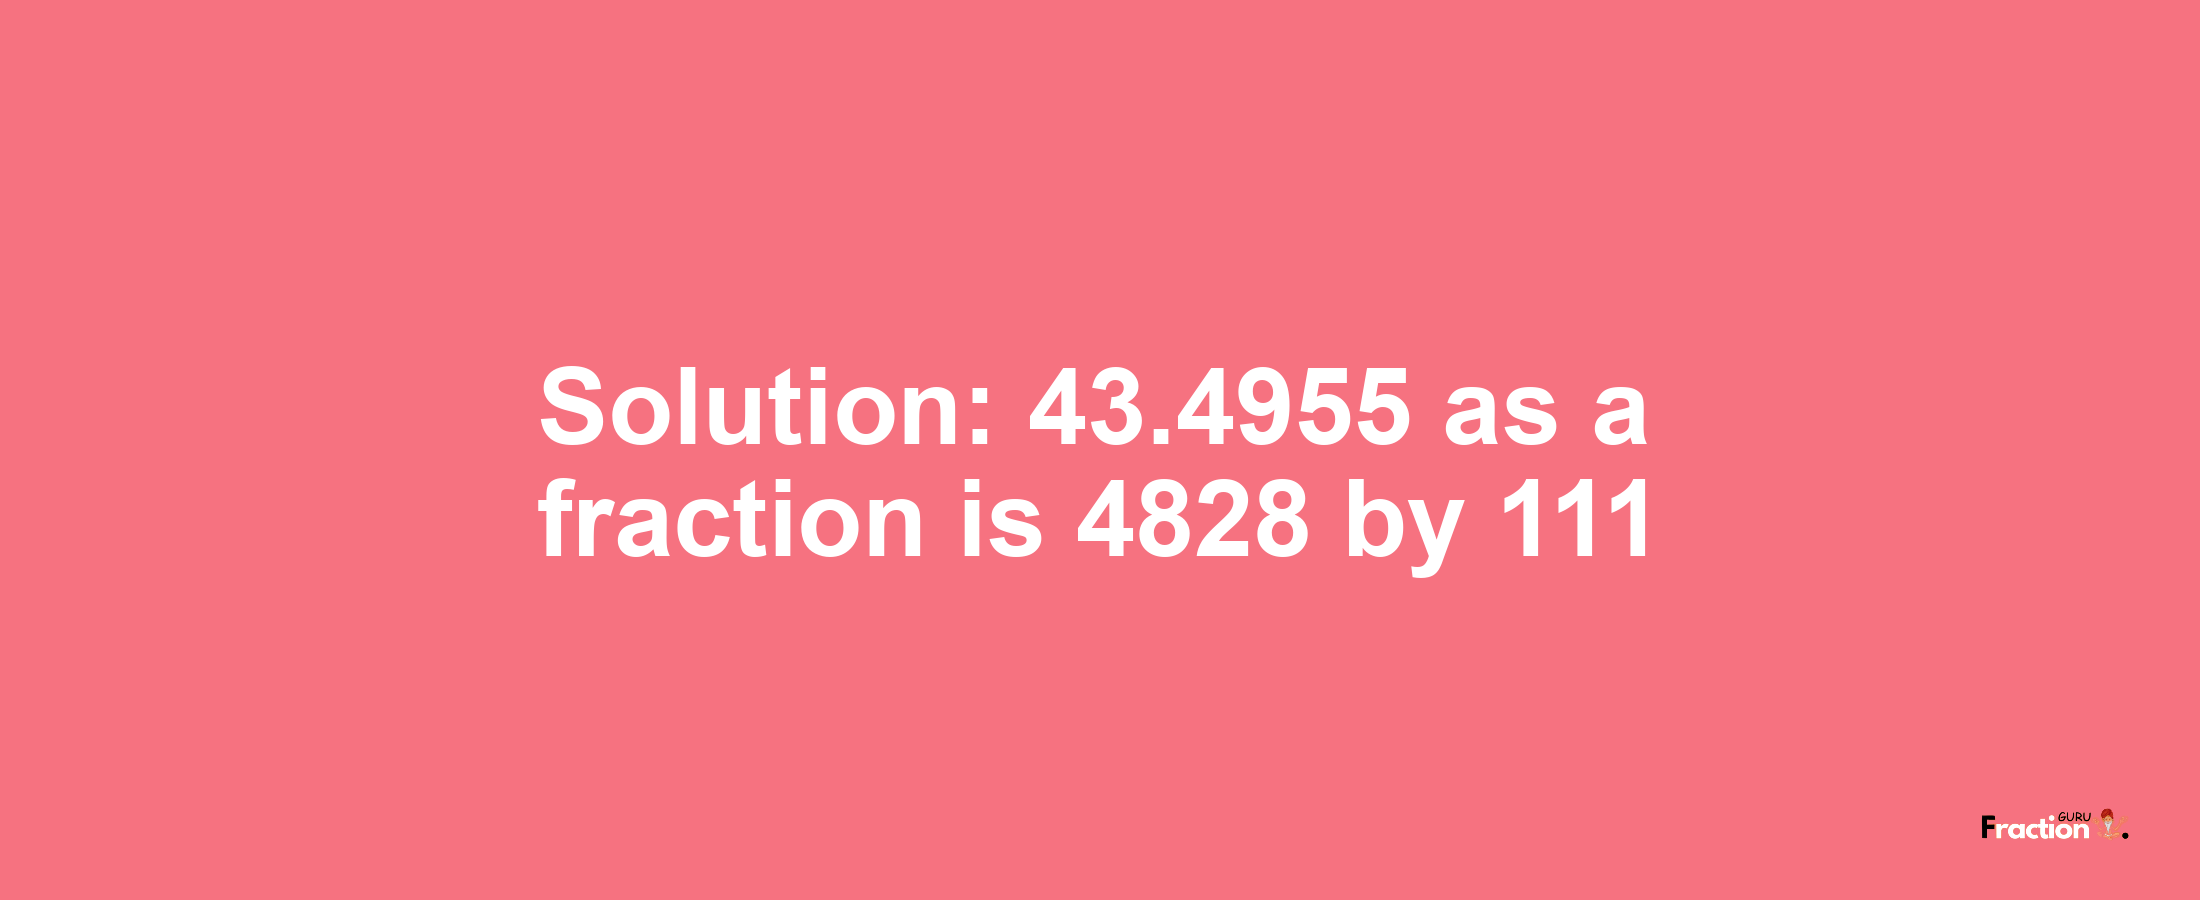 Solution:43.4955 as a fraction is 4828/111